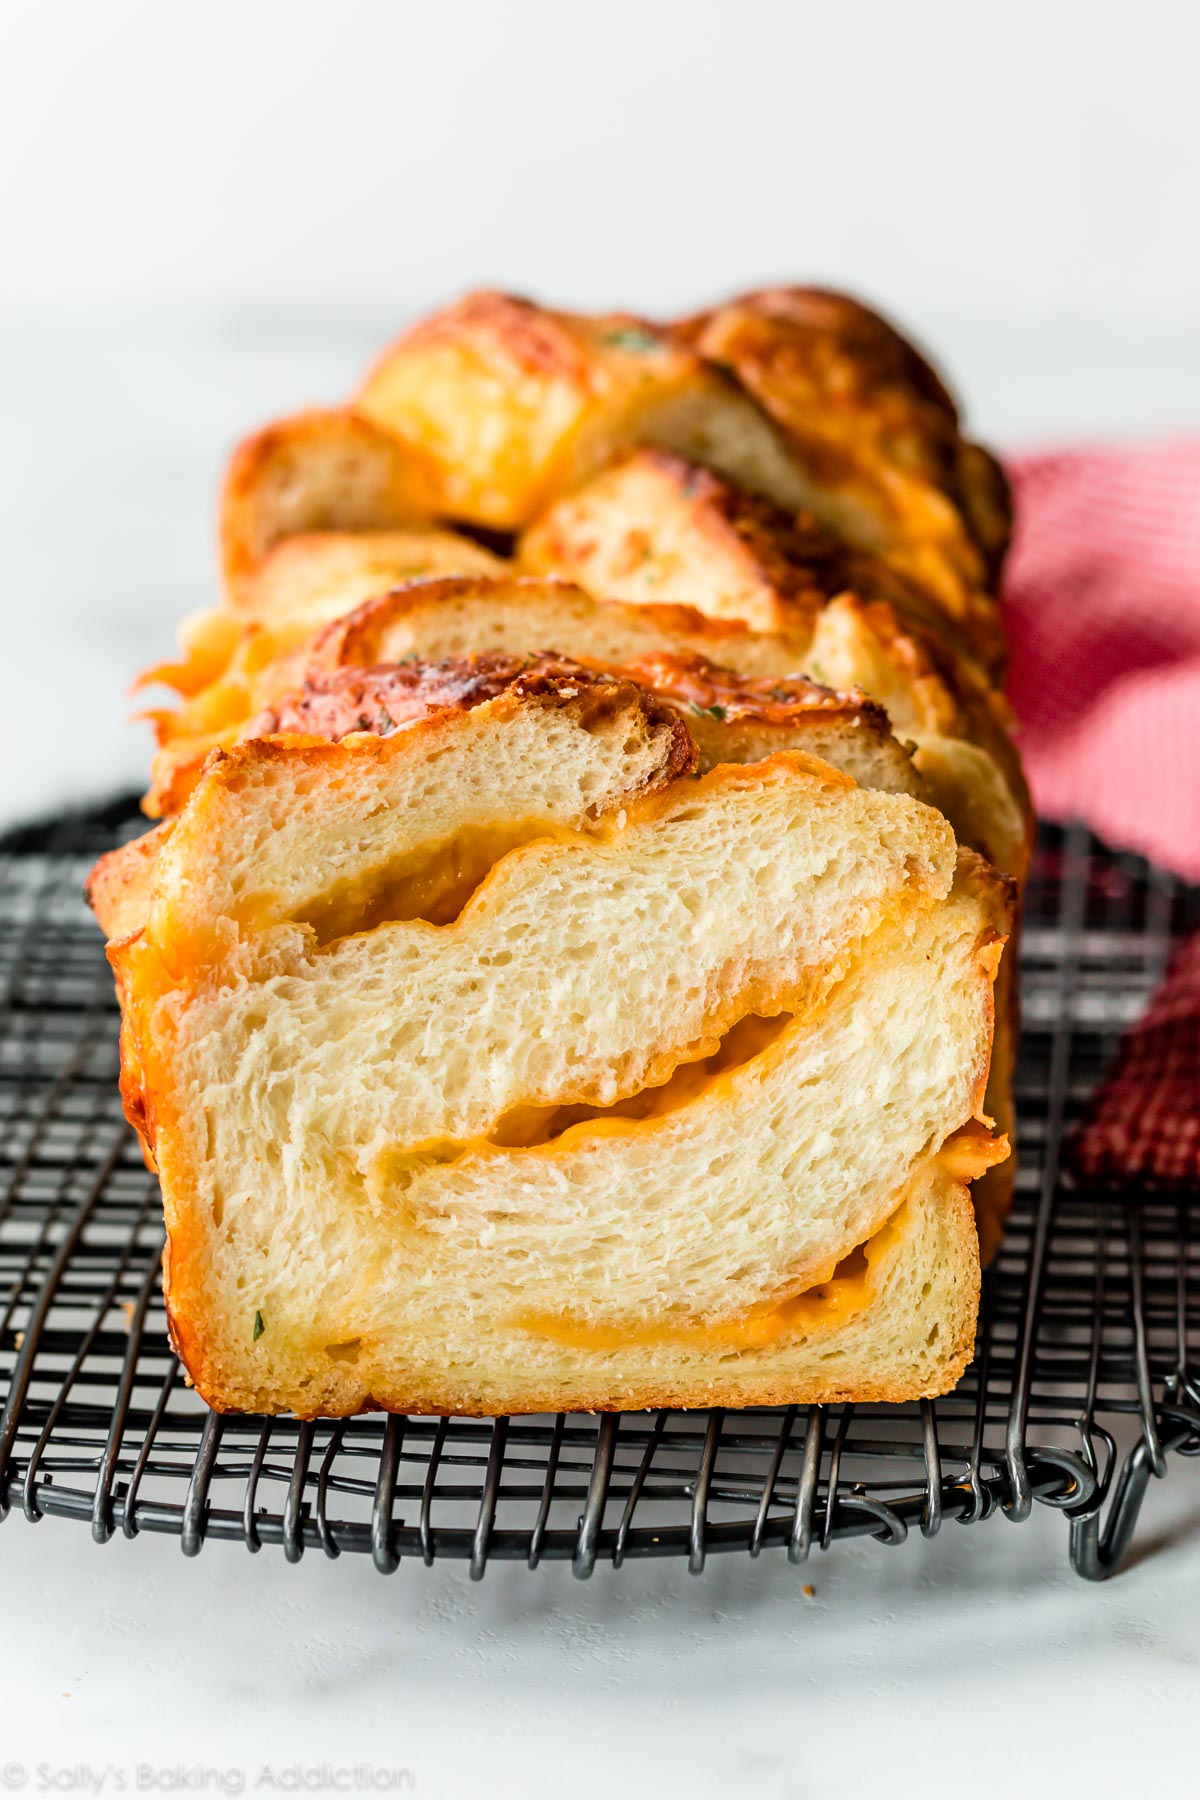 Homemade Cheese Bread – Extra Soft